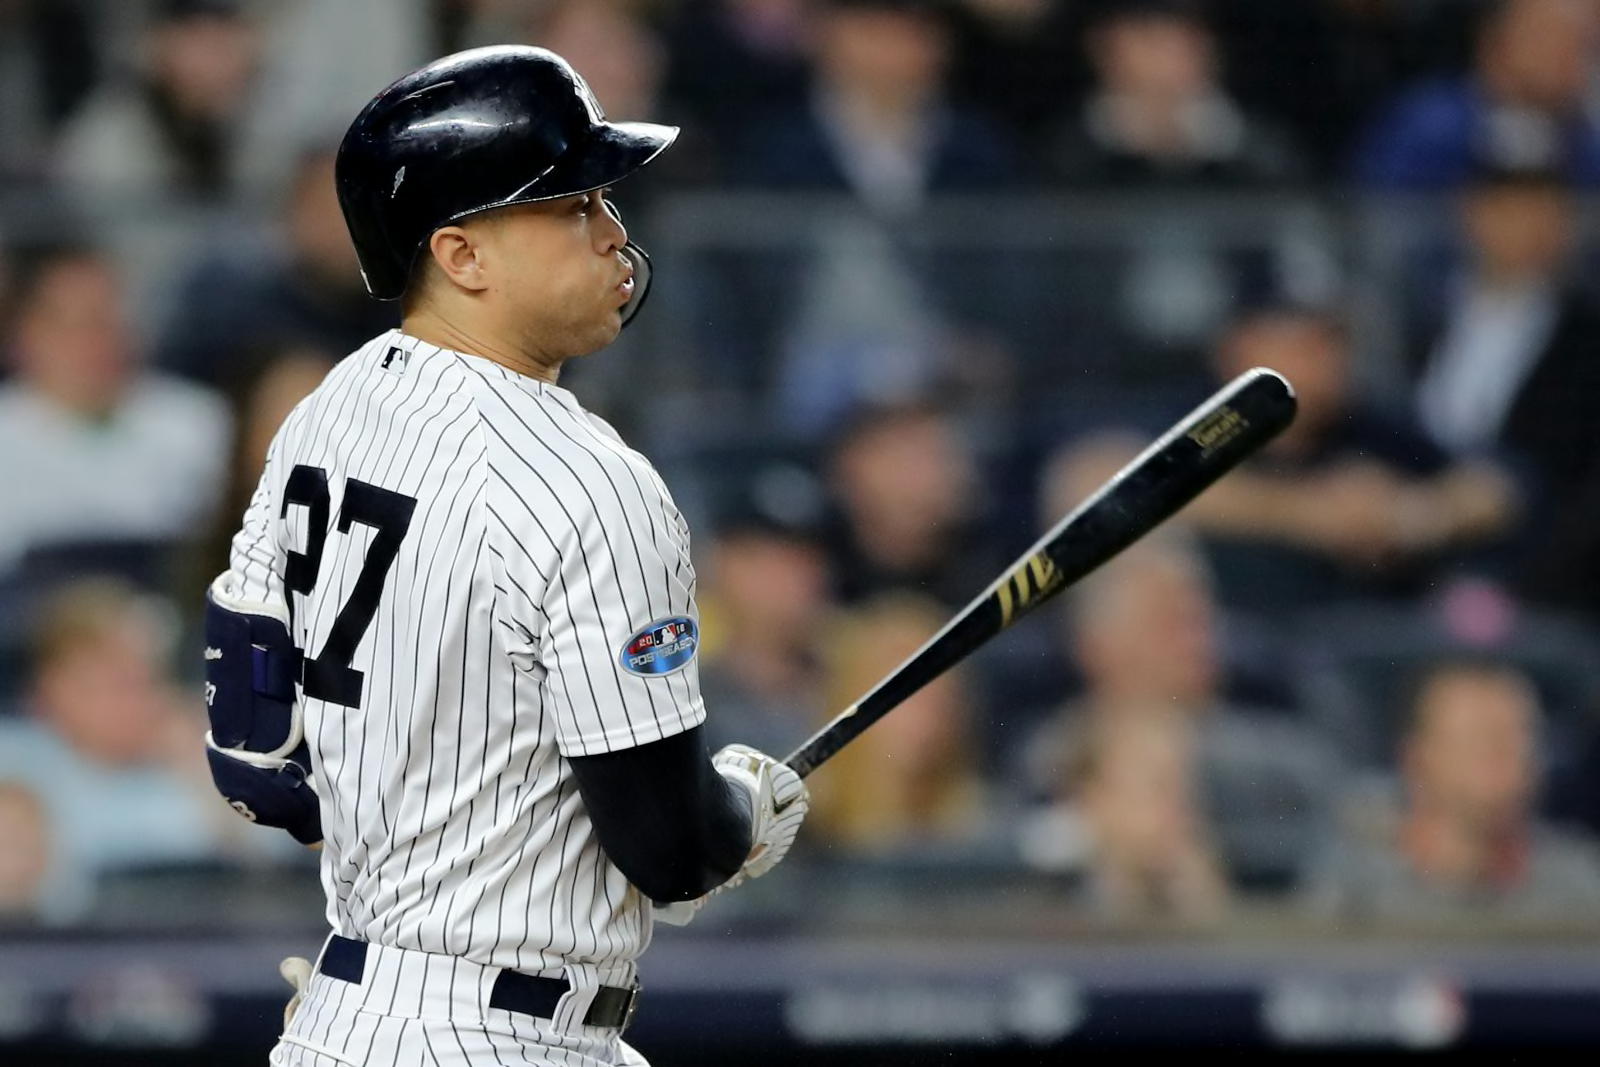 Giancarlo Stanton had a miserable 2019 season with the Yankees